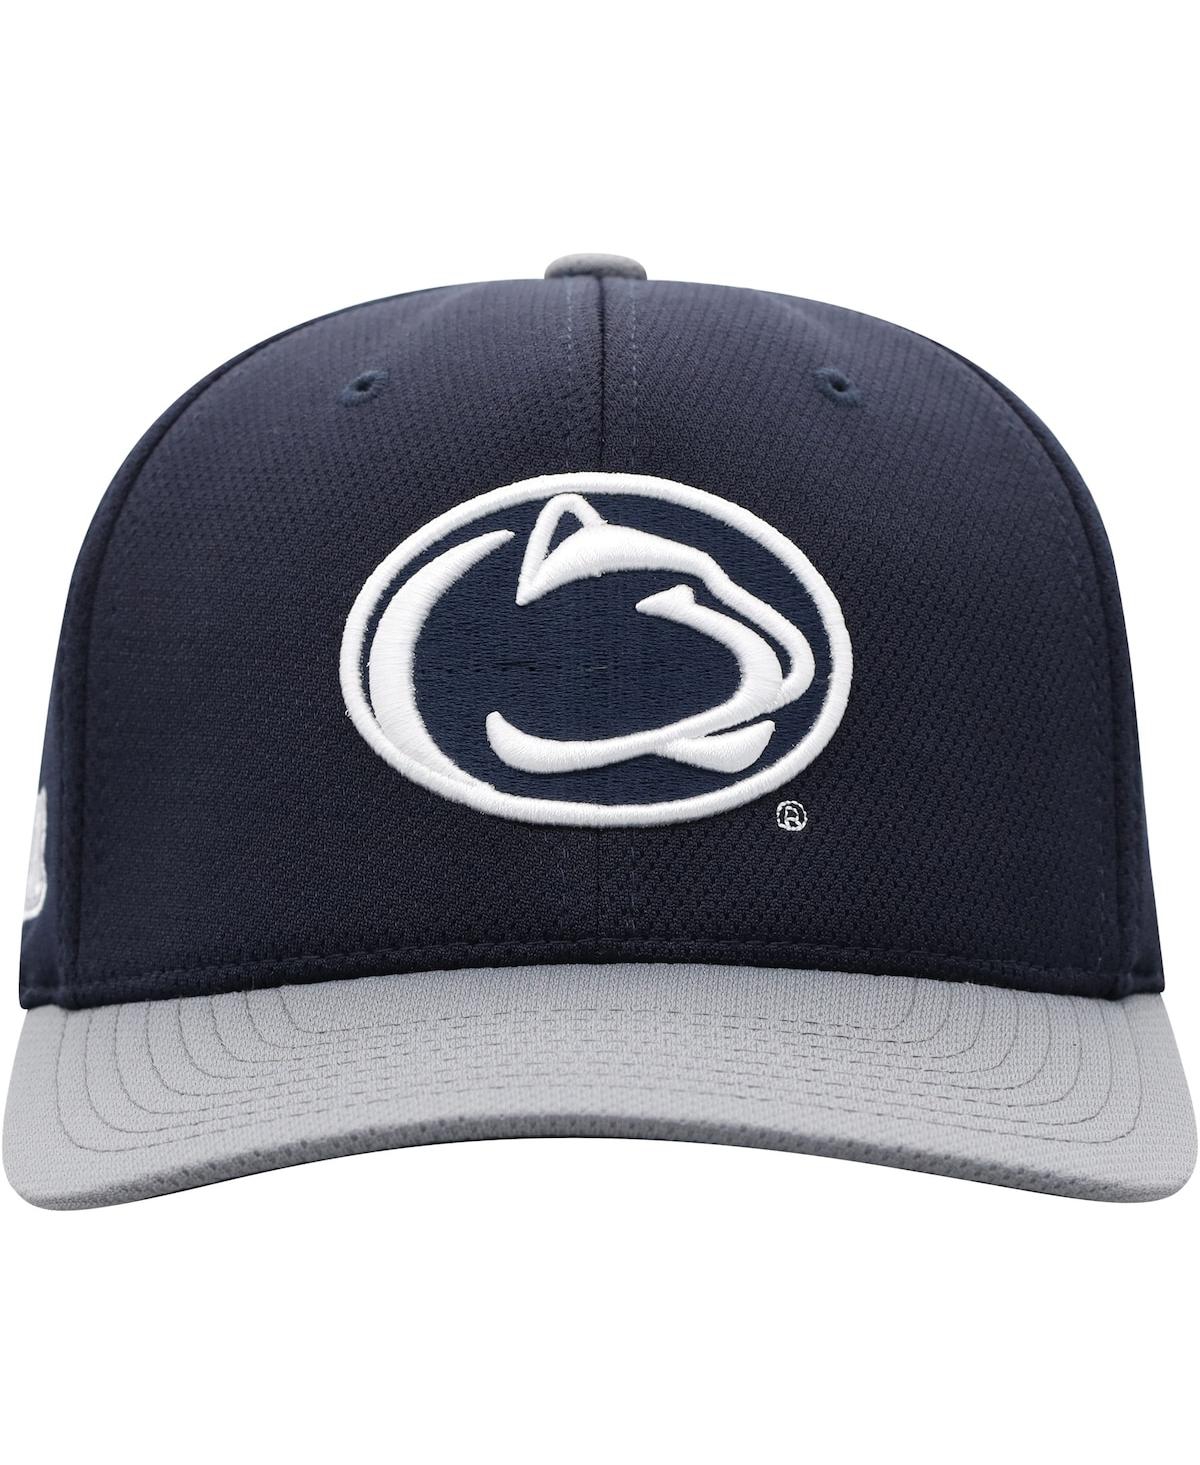 Shop Top Of The World Men's  Navy, Gray Penn State Nittany Lions Two-tone Reflex Hybrid Tech Flex Hat In Navy,gray